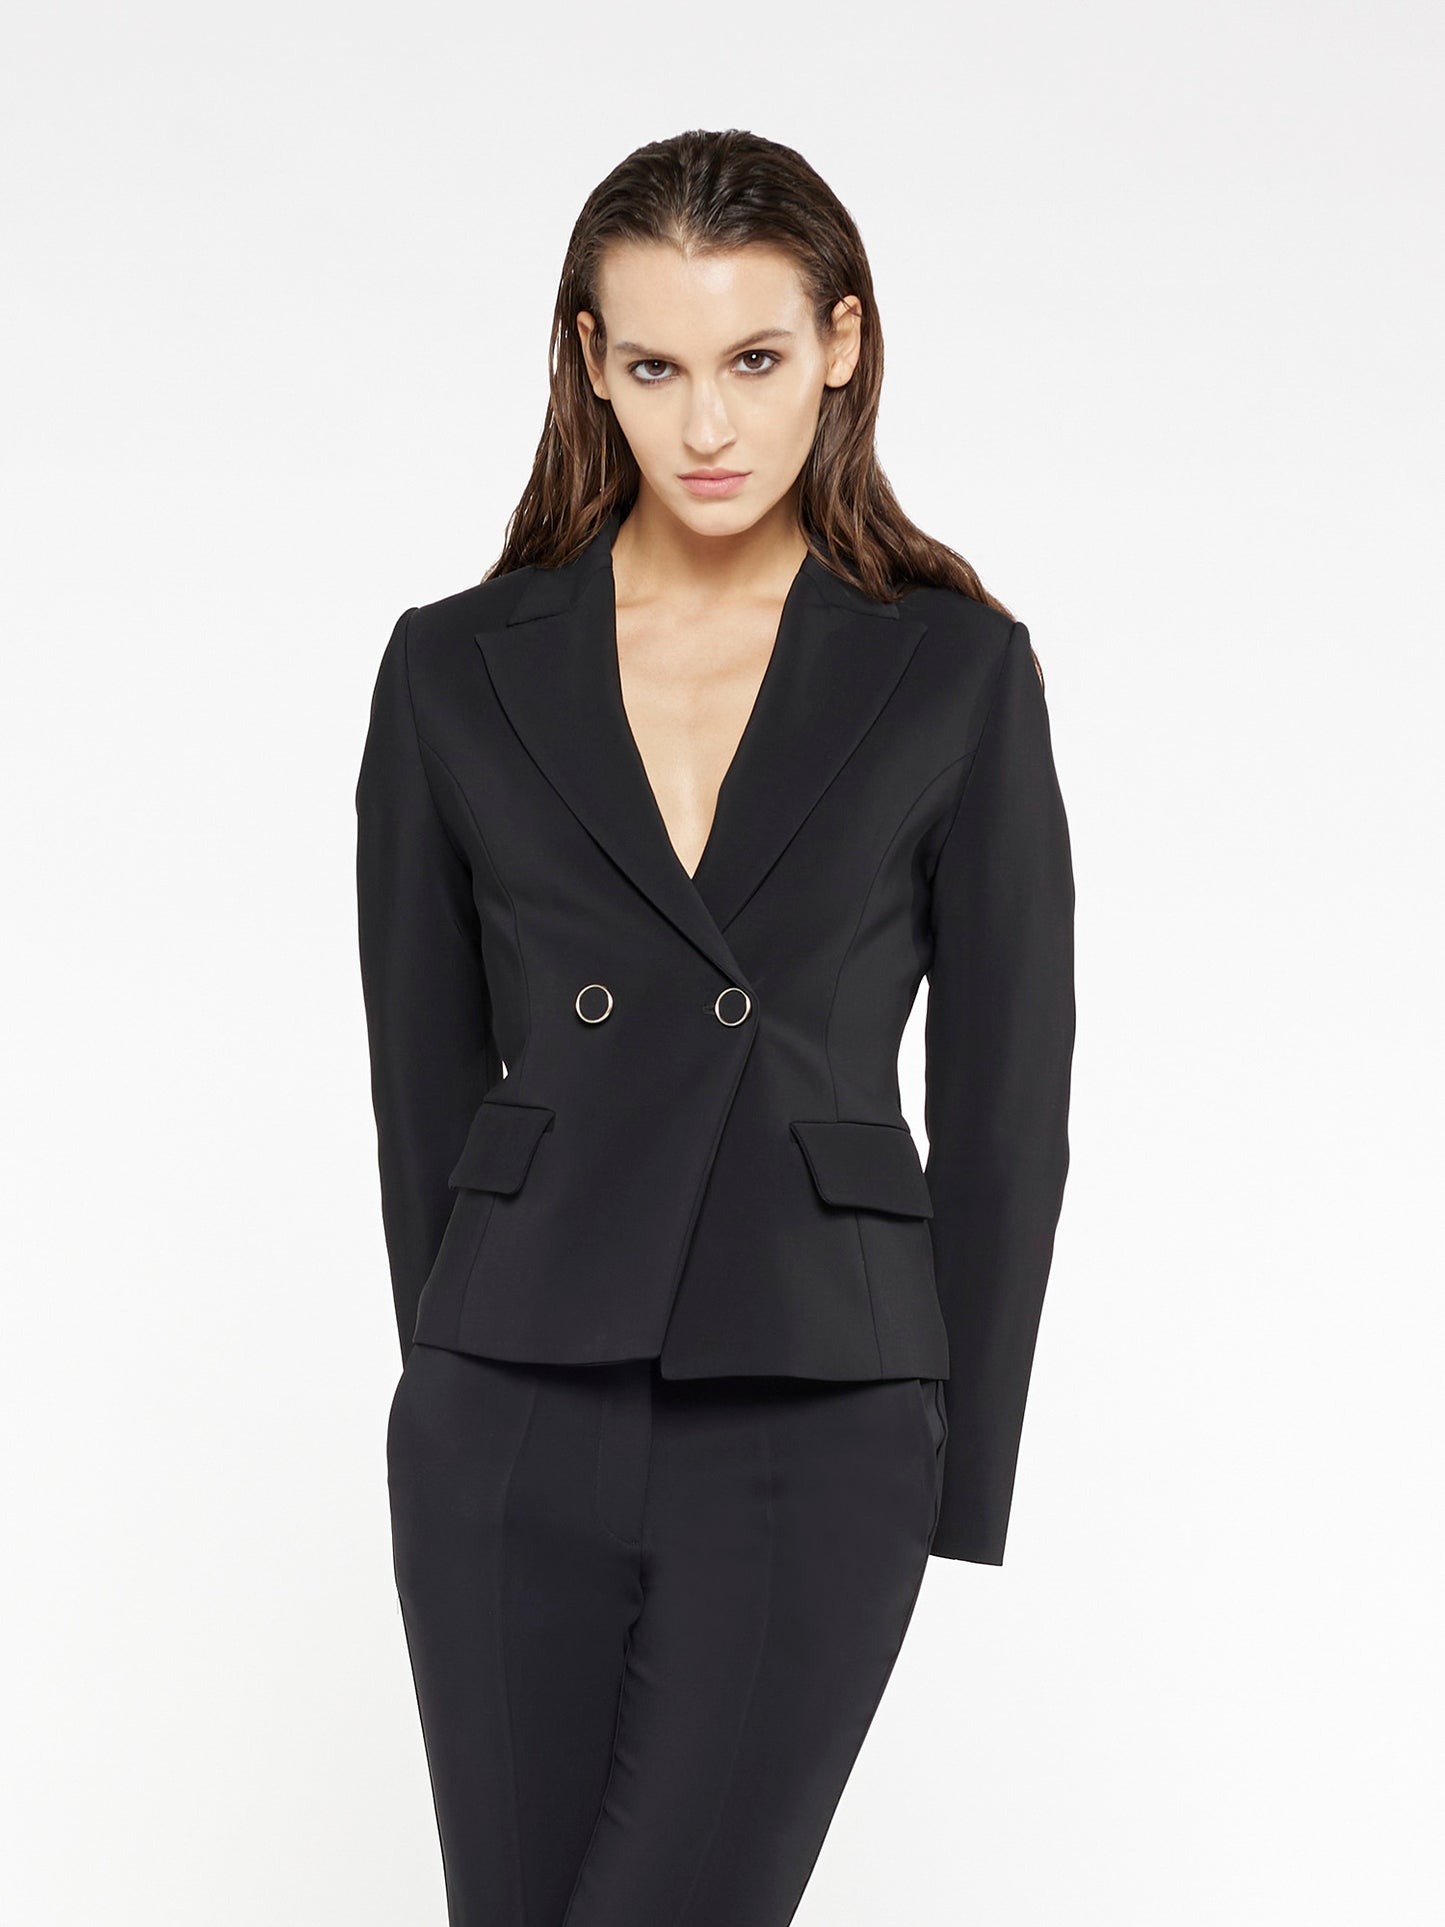 Ultra-fitted short jacket